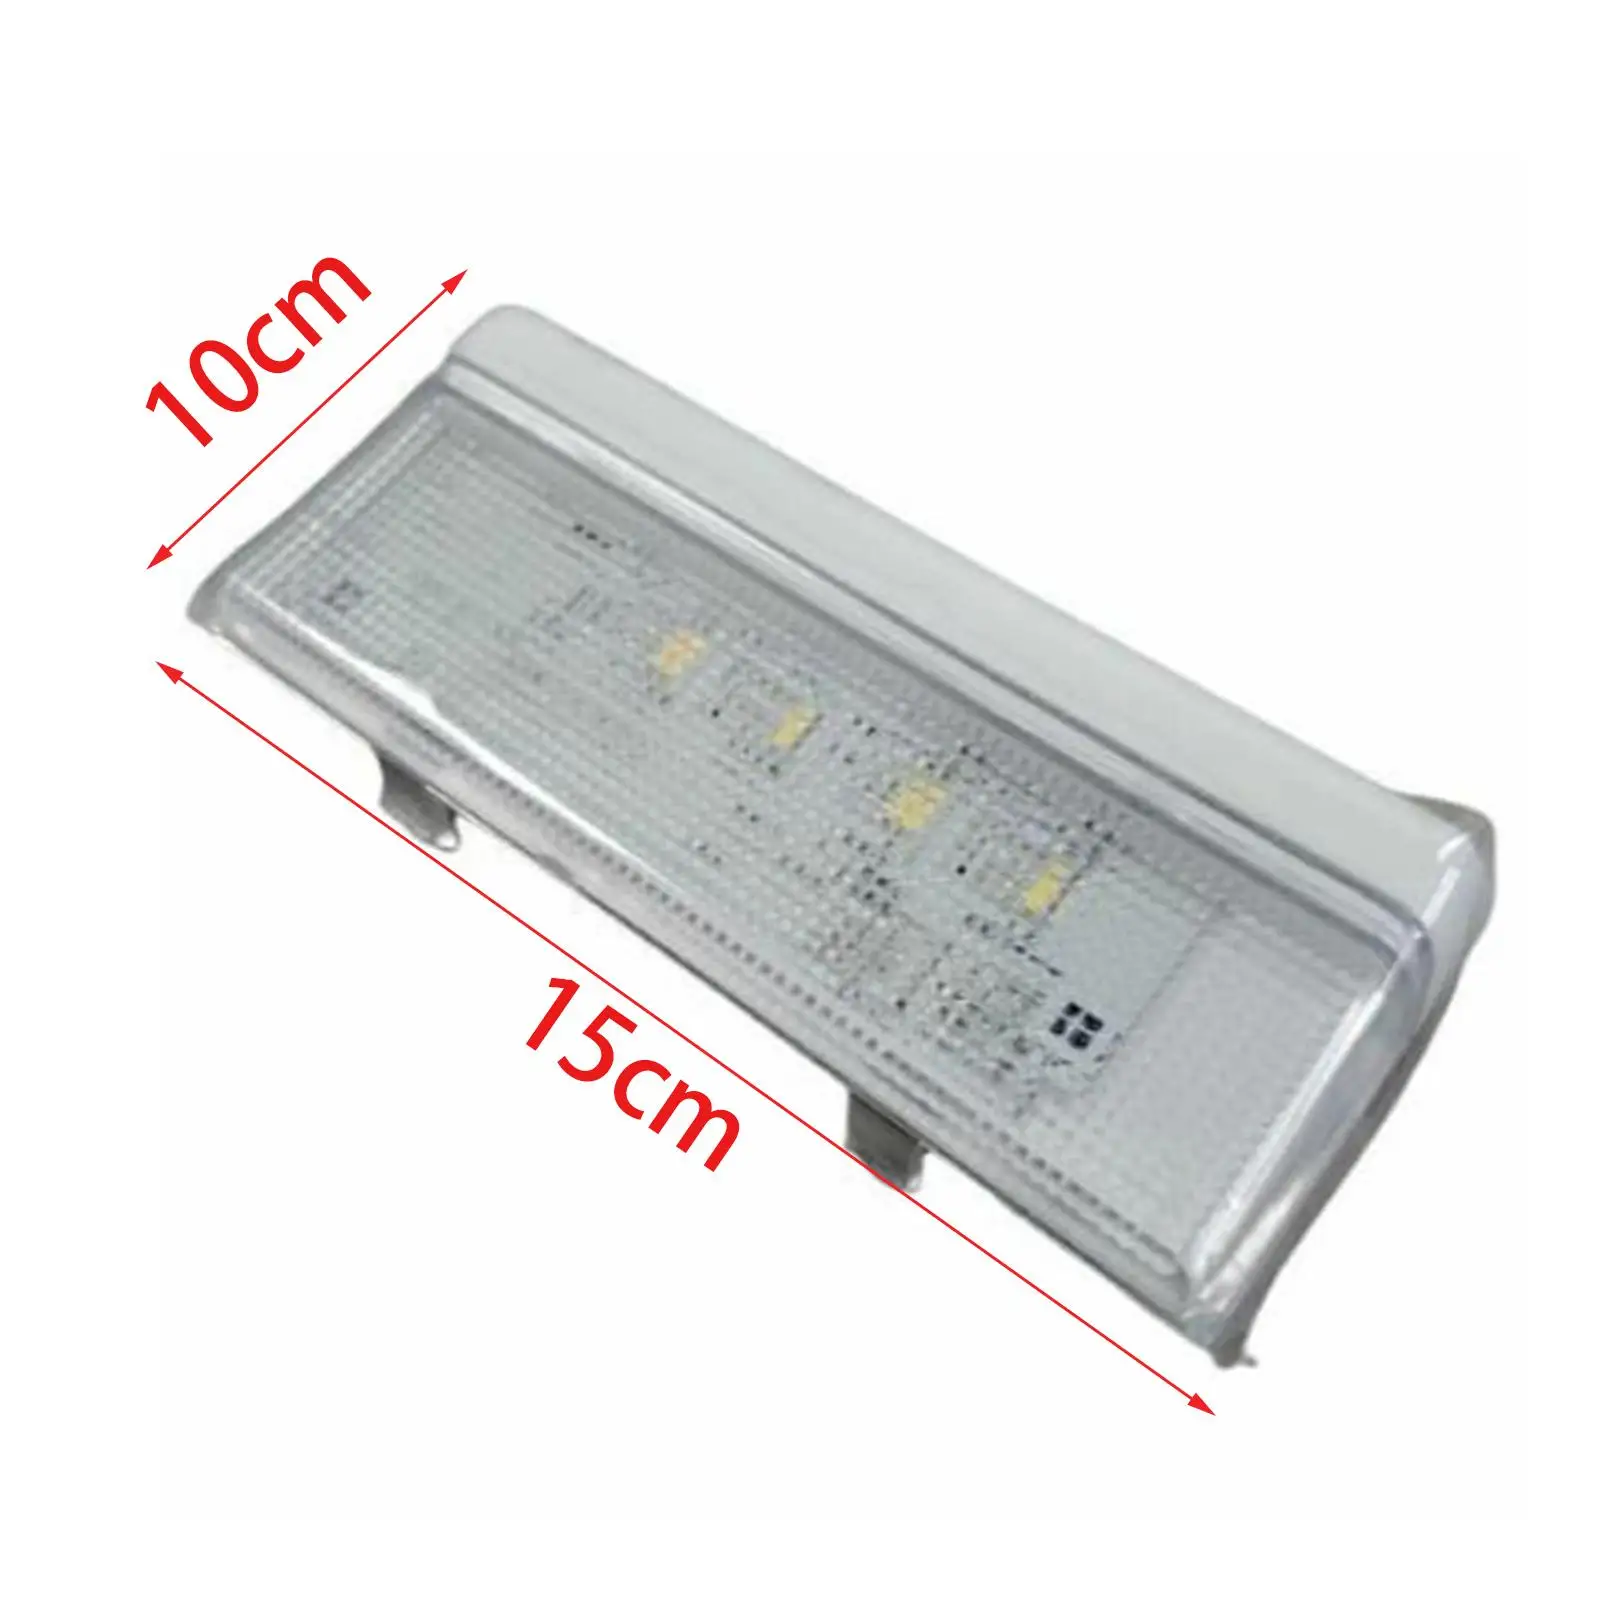 Refrigerator LED Lights W10515057 Parts Replace Part with Tapered Lens and Bezel Refrigerator LED Light Board for Refrigerators